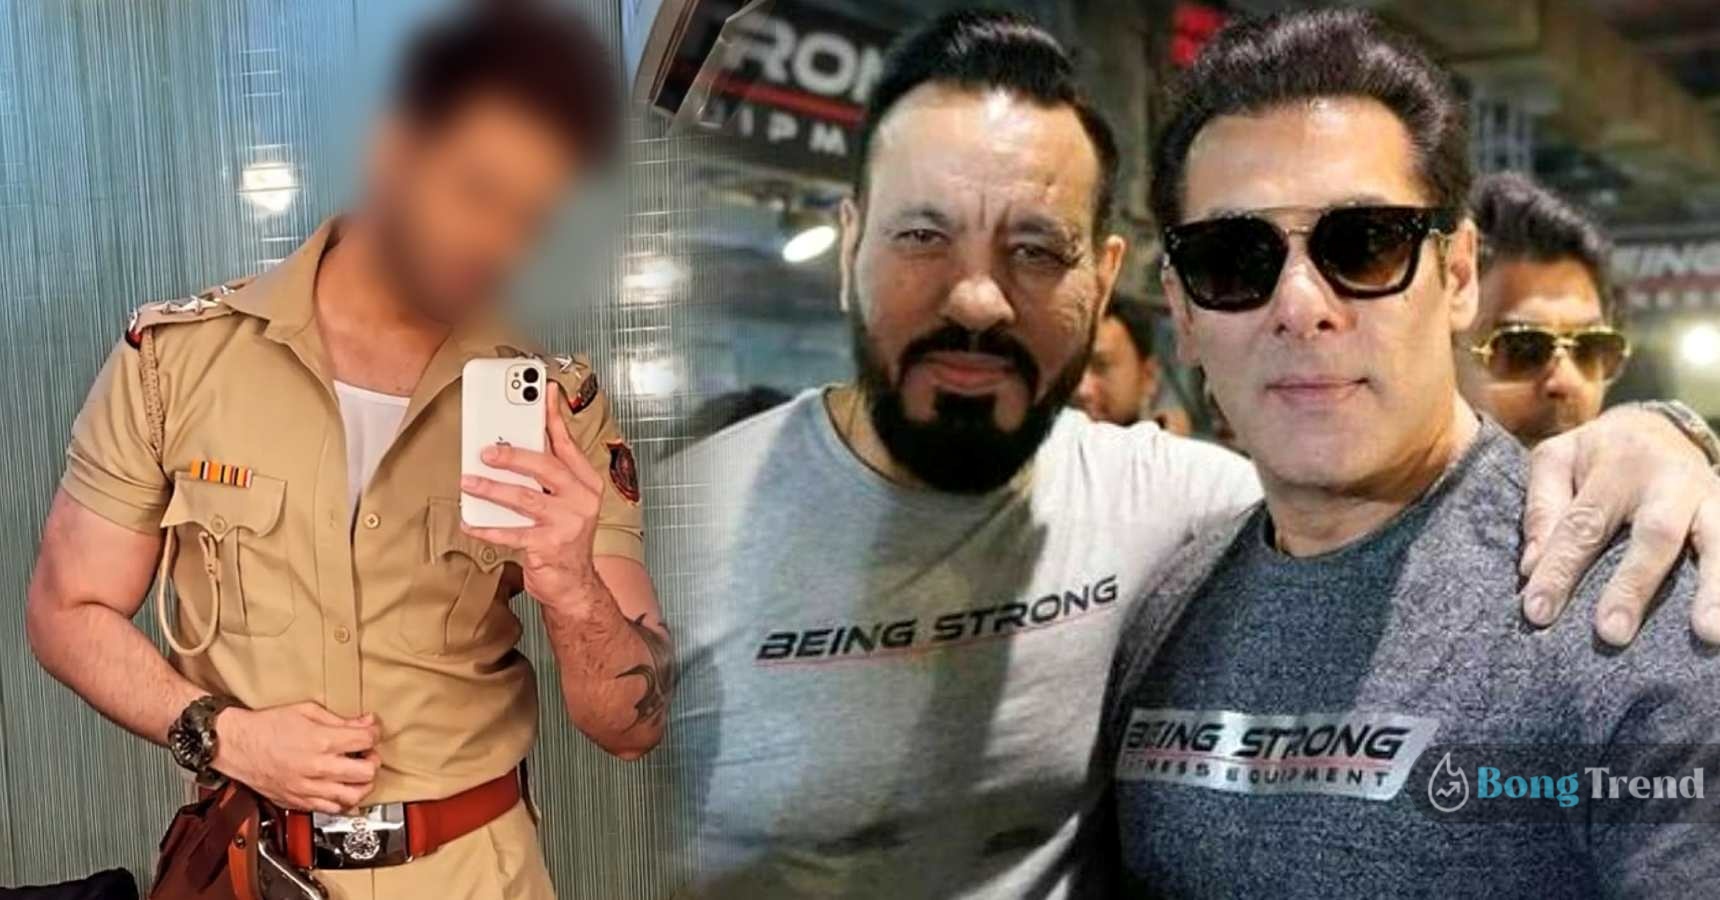 Salman Khan about to launch Bodyguard Shera's Son in Bollywood